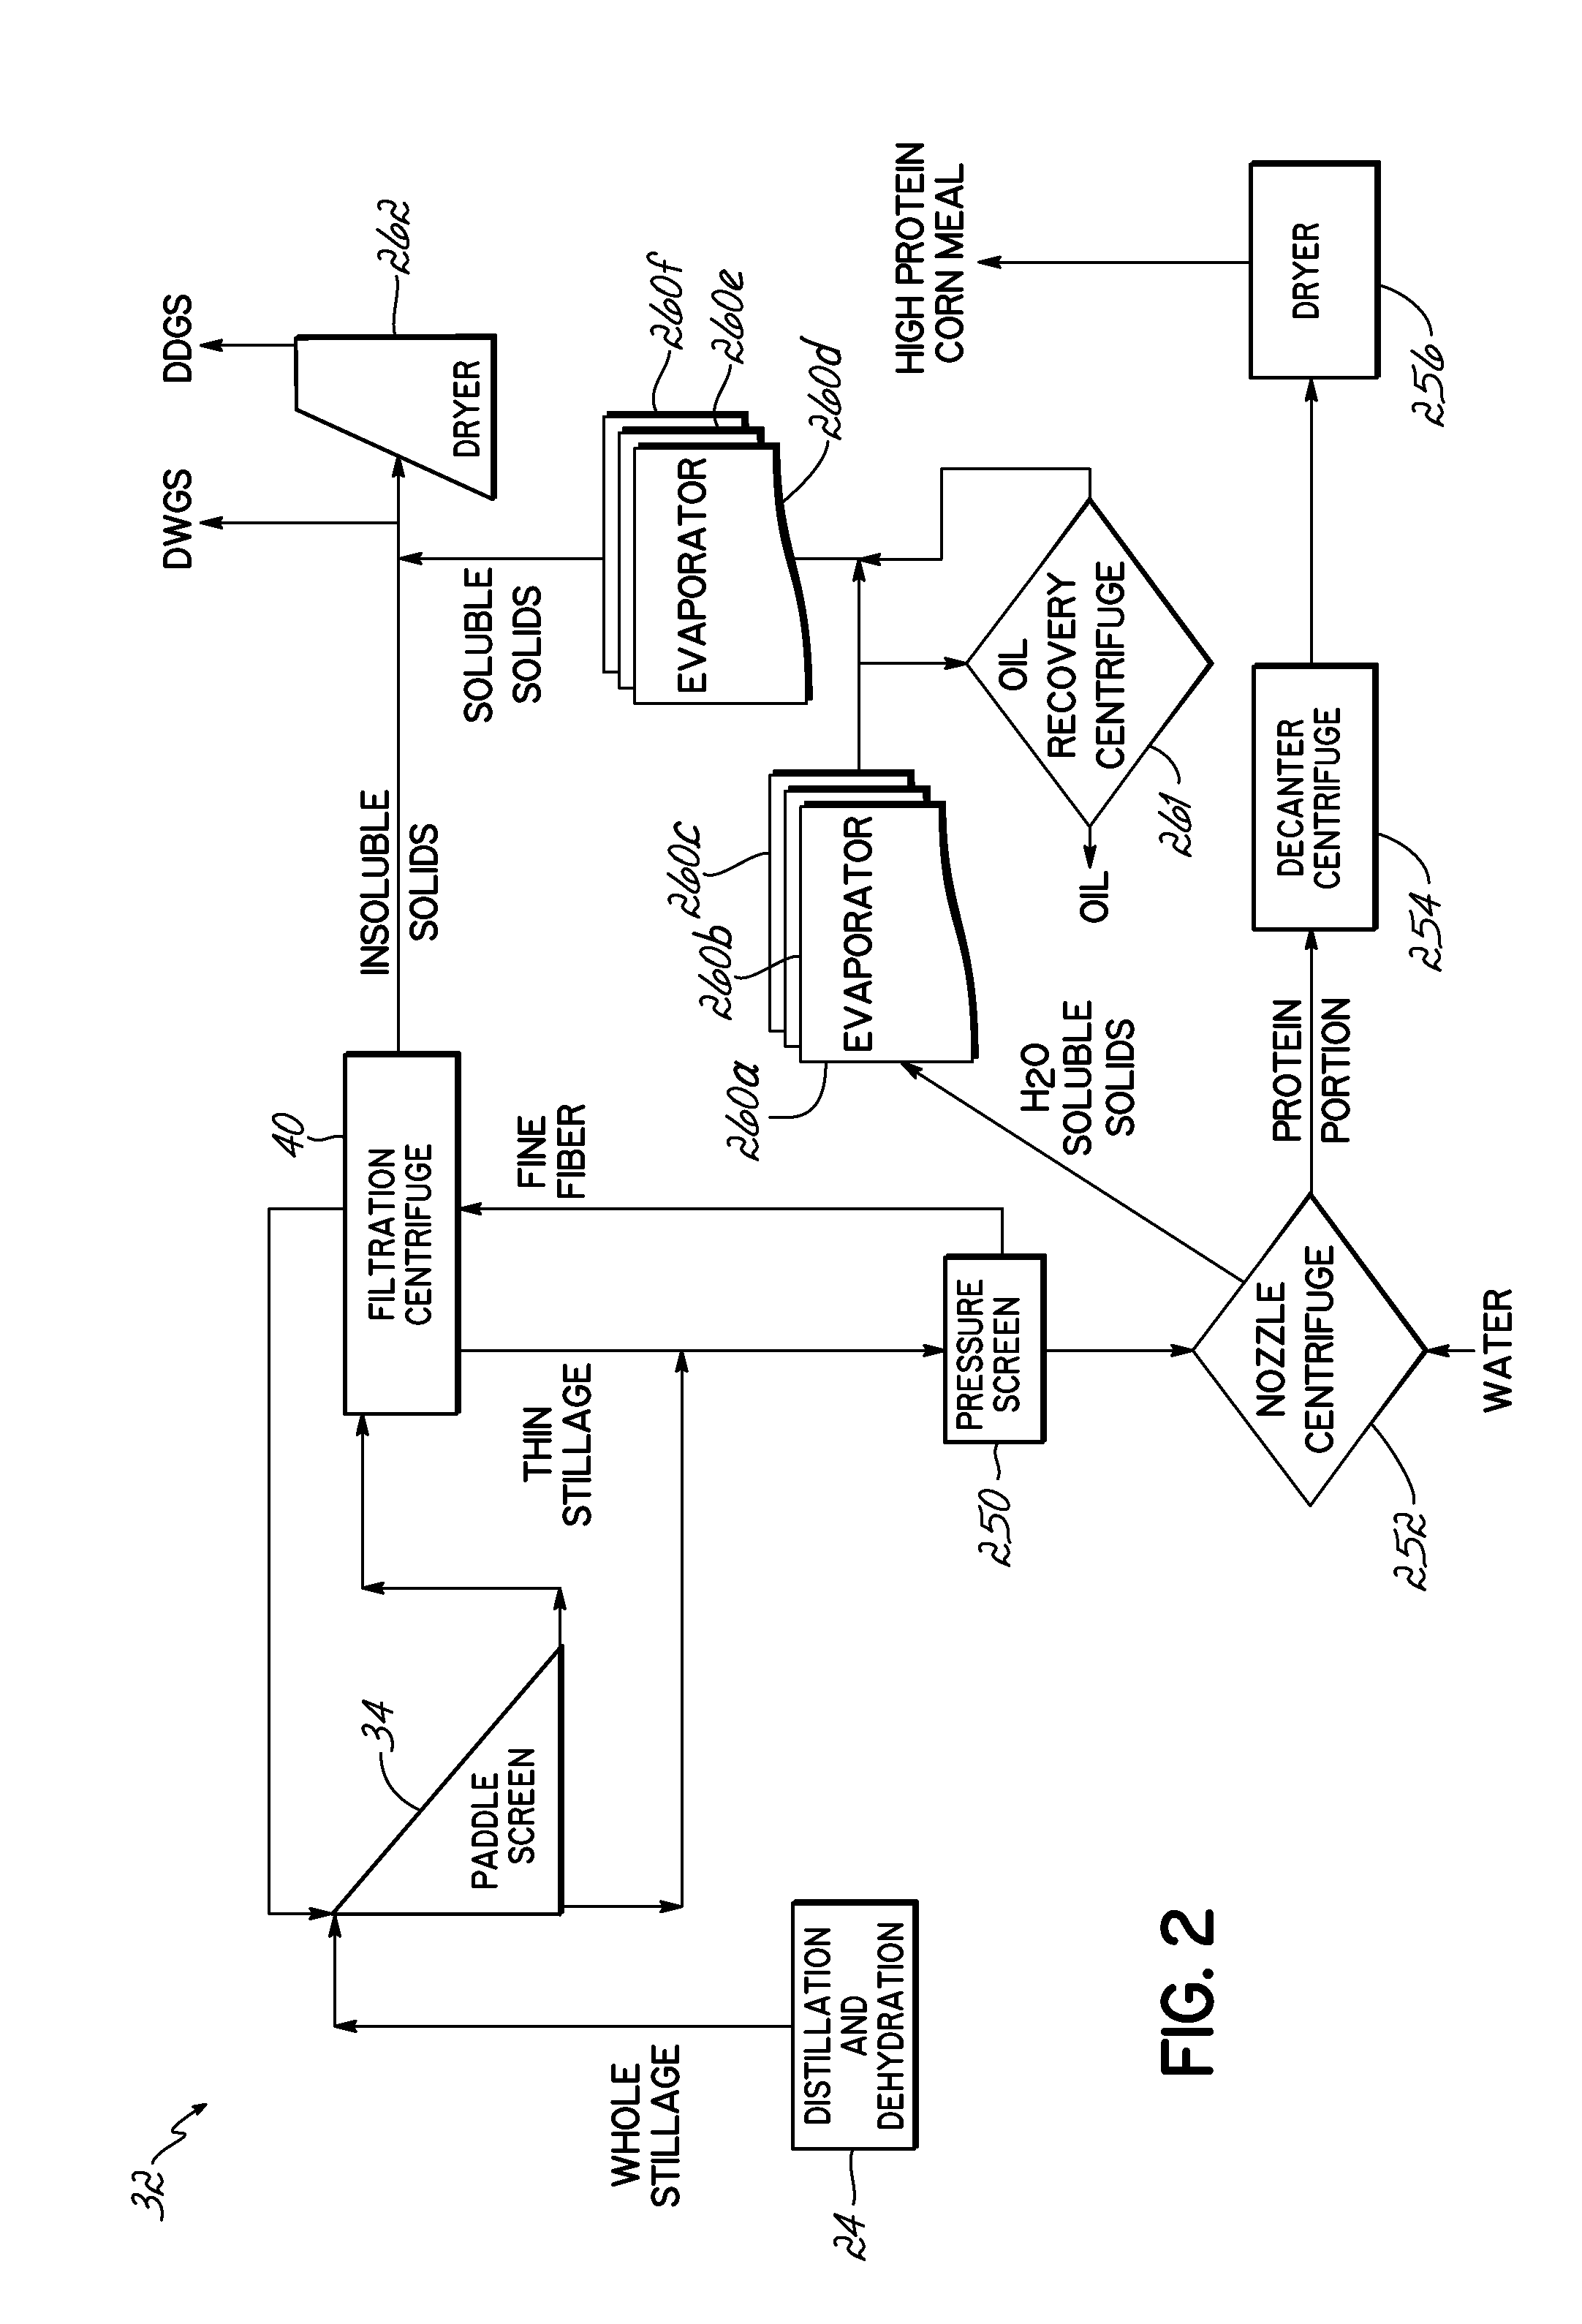 Methods for producing a high protein corn meal from a whole stillage byproduct and system therefore